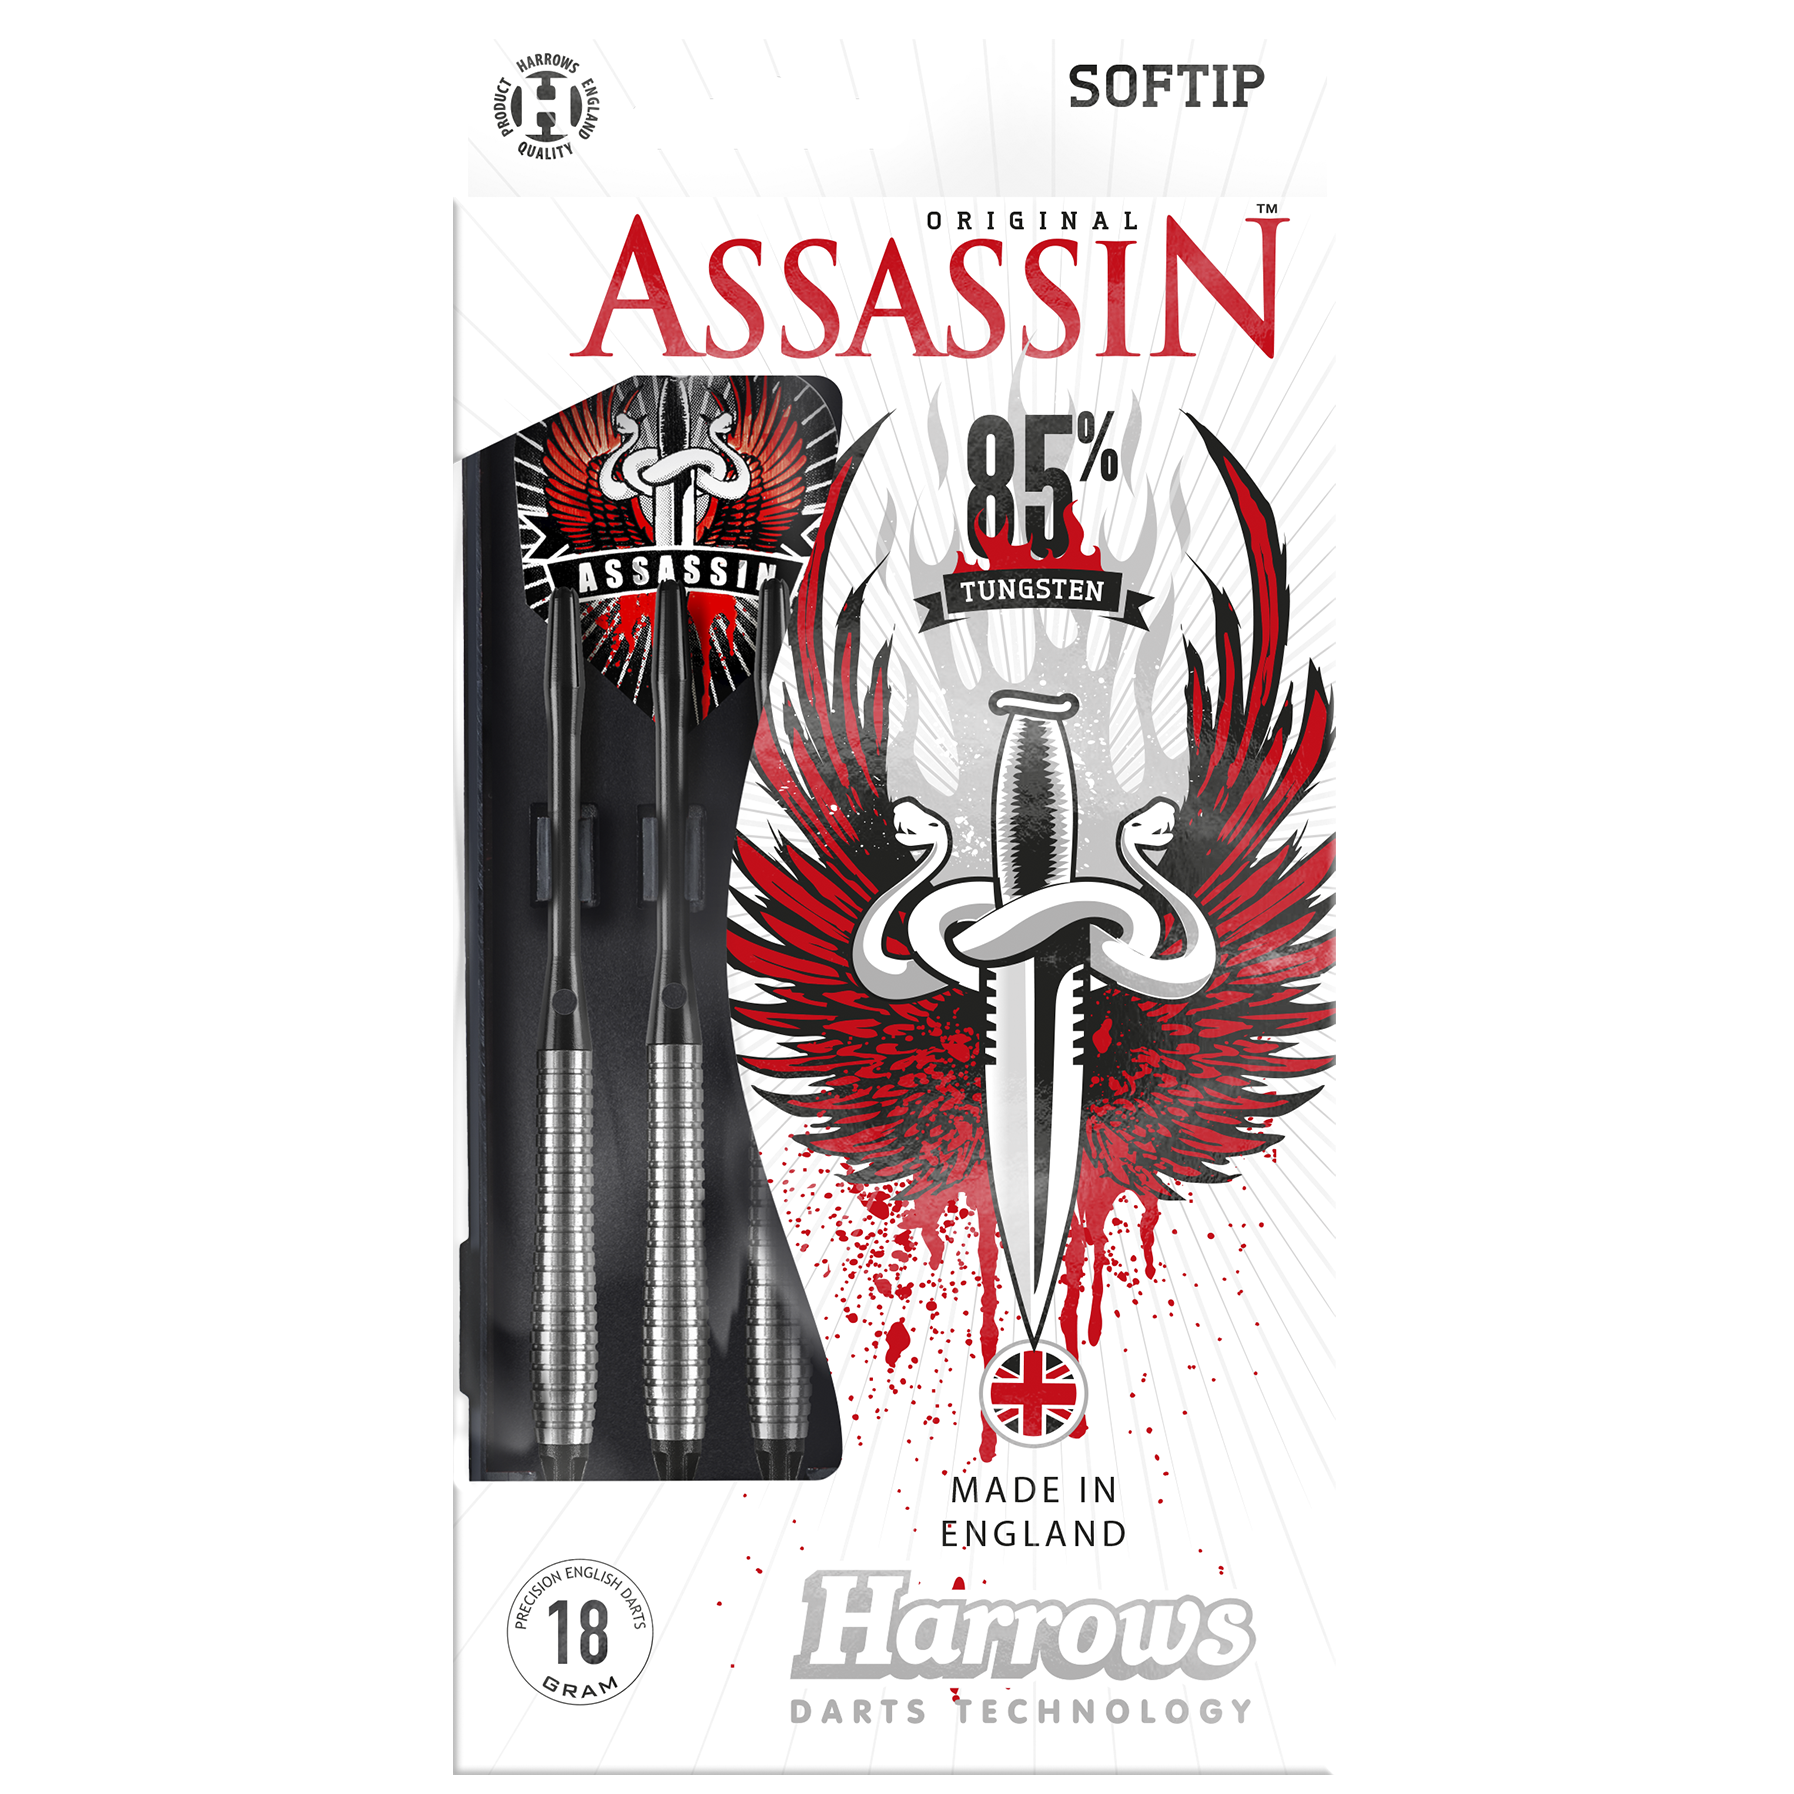 Assassin 85% - Style A